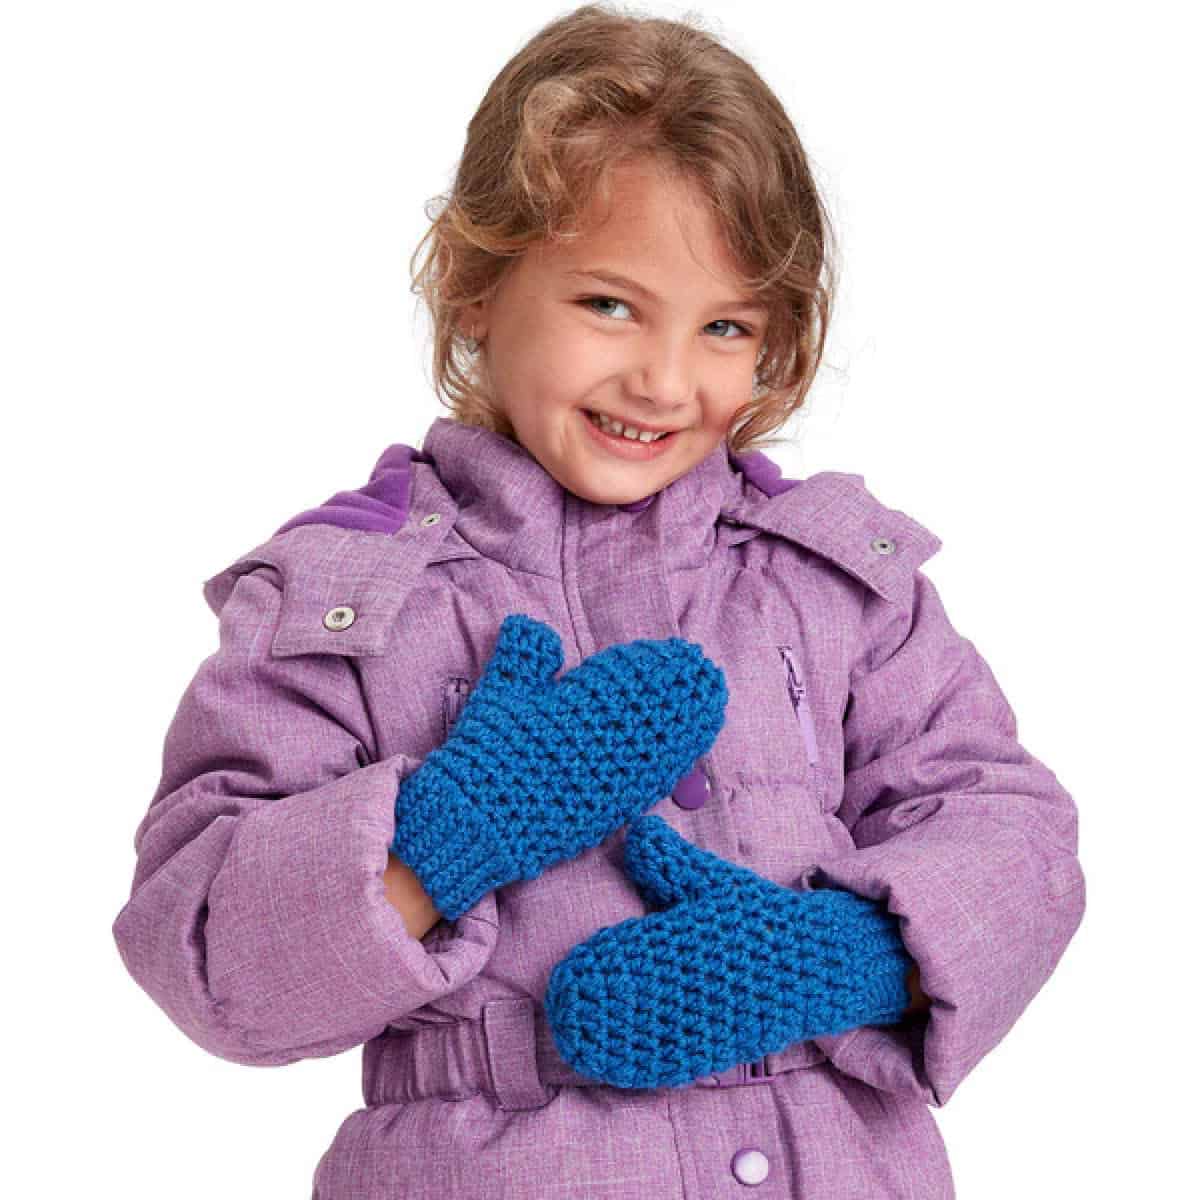 Crochet Mittens for the Family Pattern